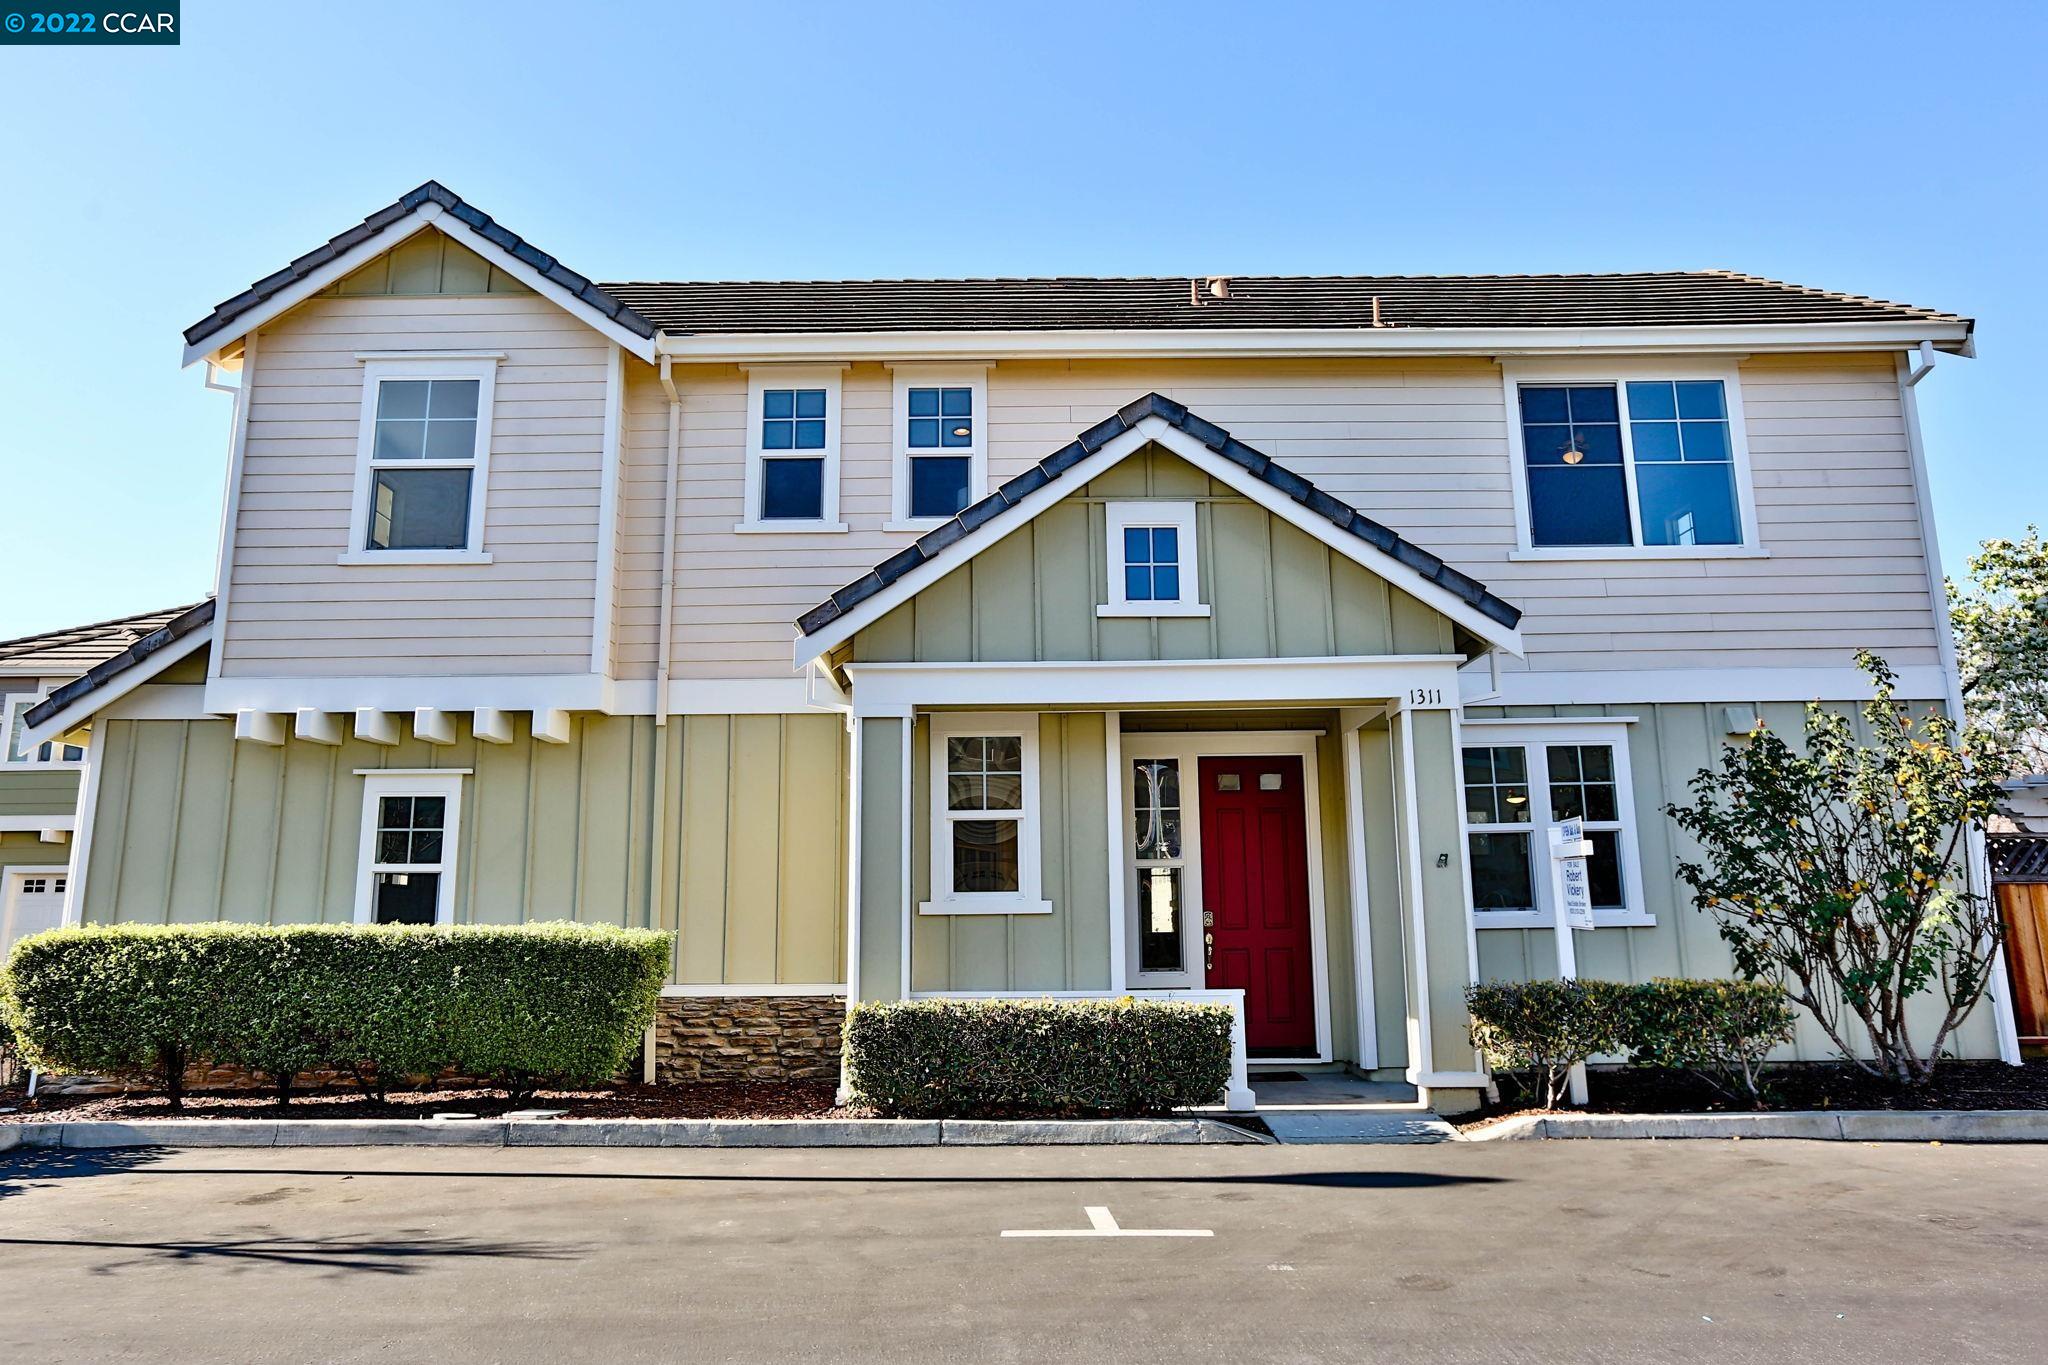 Photo of 1311 Tapestry Ln in Concord, CA